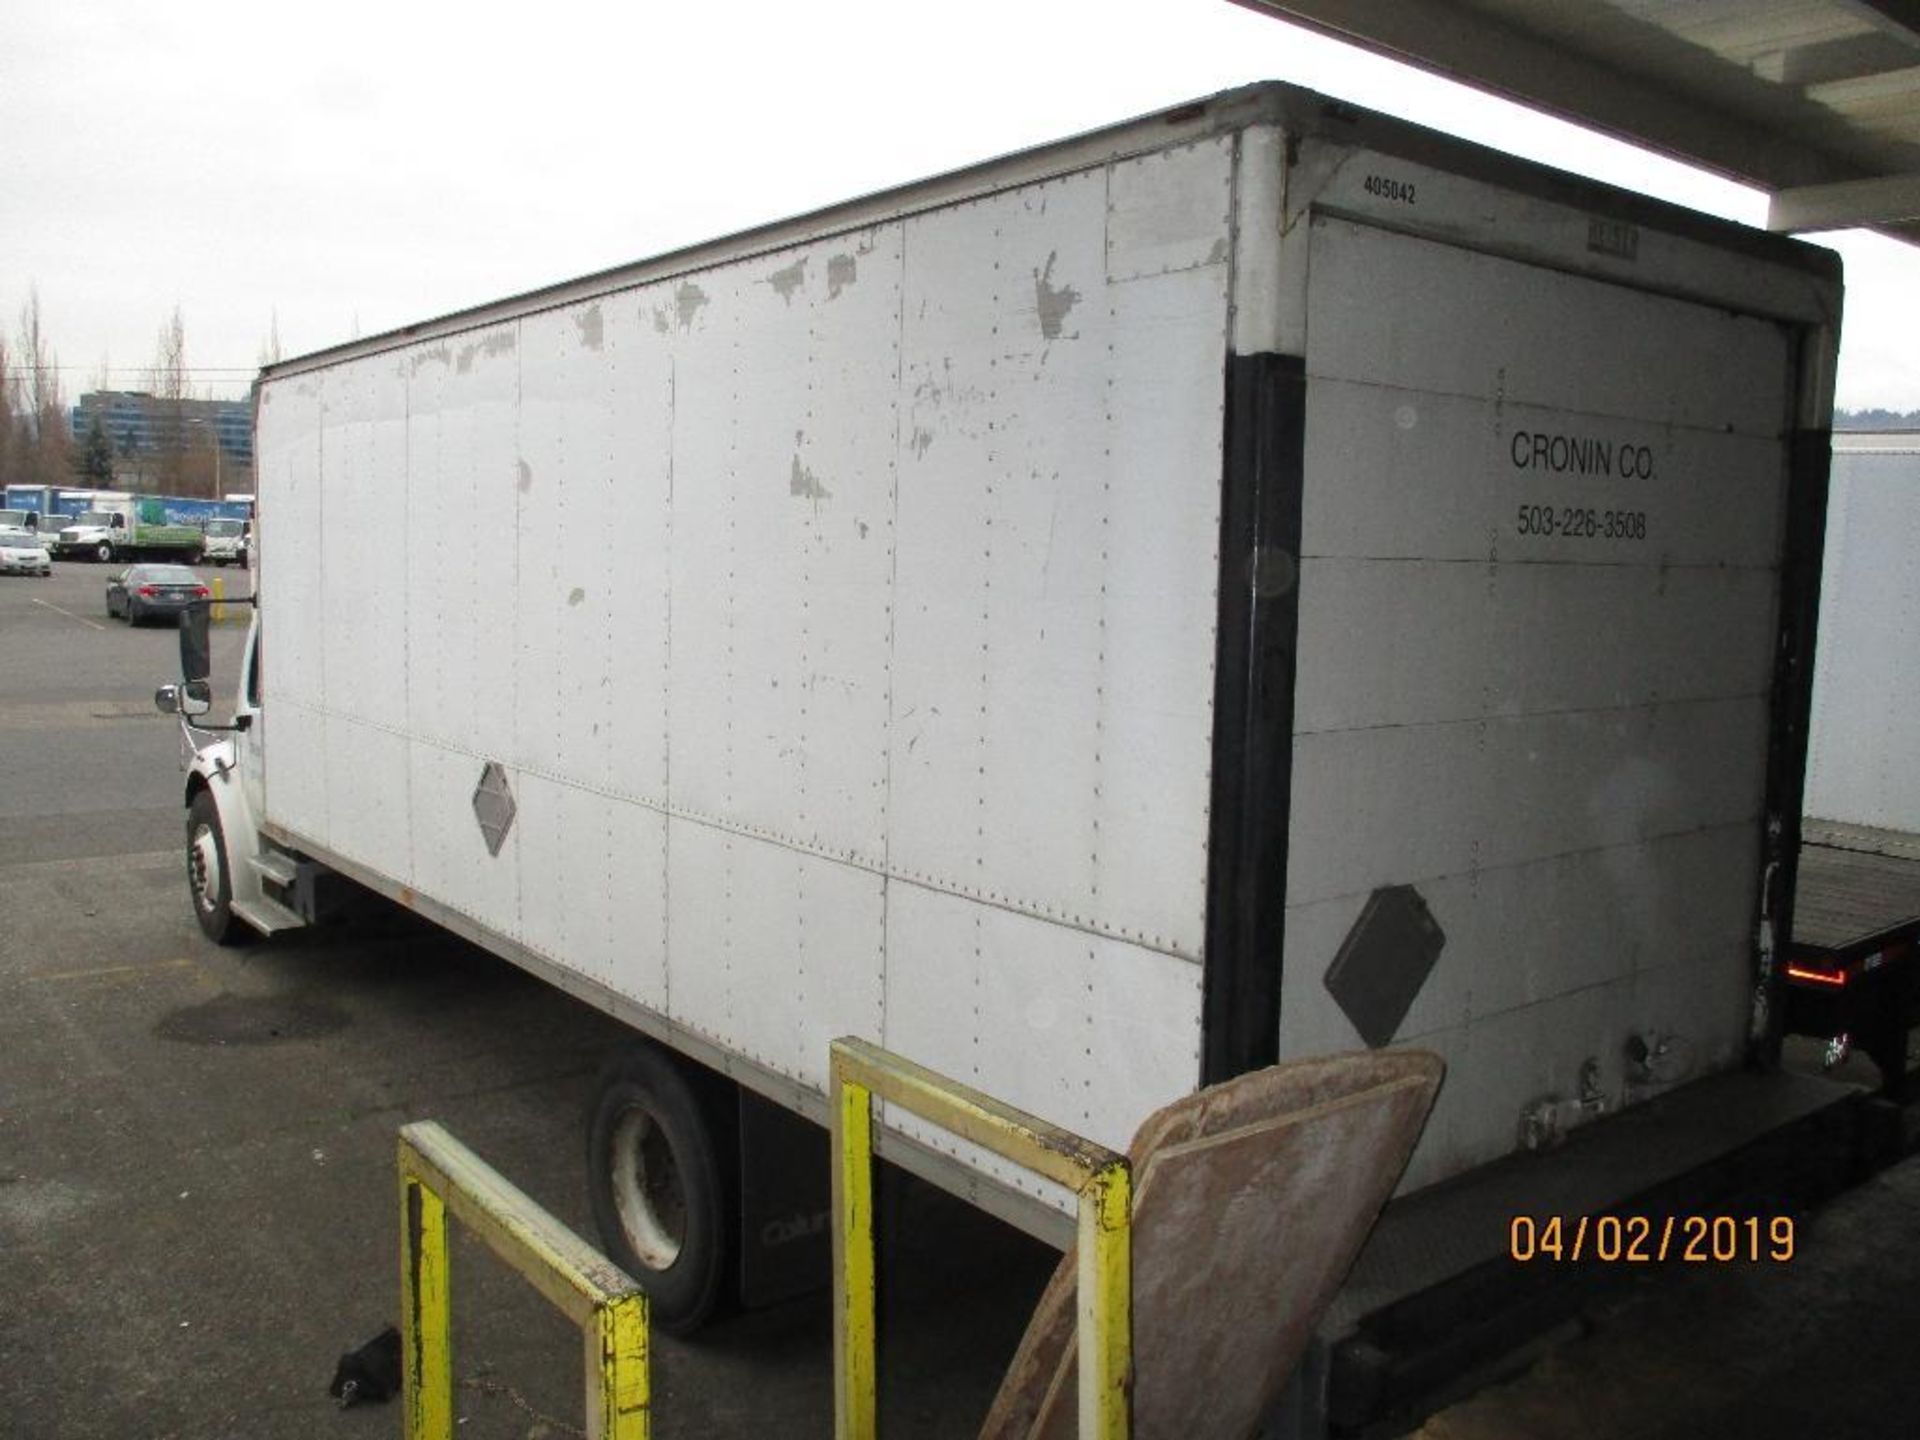 2004 Freightliner Business Class M2 Box Truck 24ft With Lift Gate, Automatic, GVWR 33,000lb, 195623 - Image 3 of 14